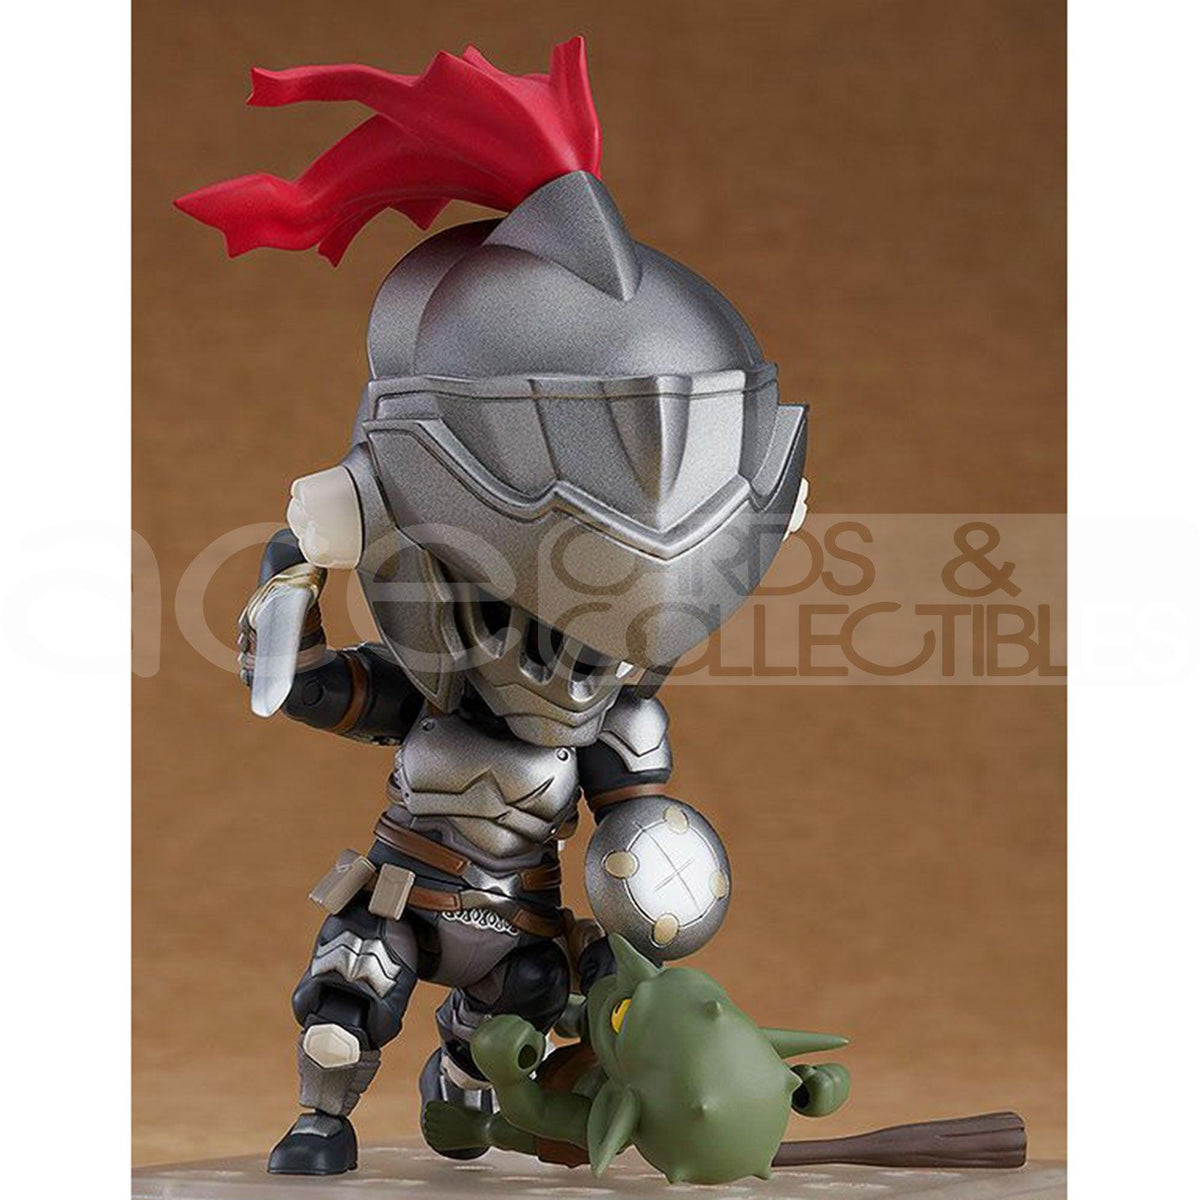 Goblin Slayer Nendoroid [1042] &quot;Goblin Slayer&quot;-Good Smile Company-Ace Cards &amp; Collectibles